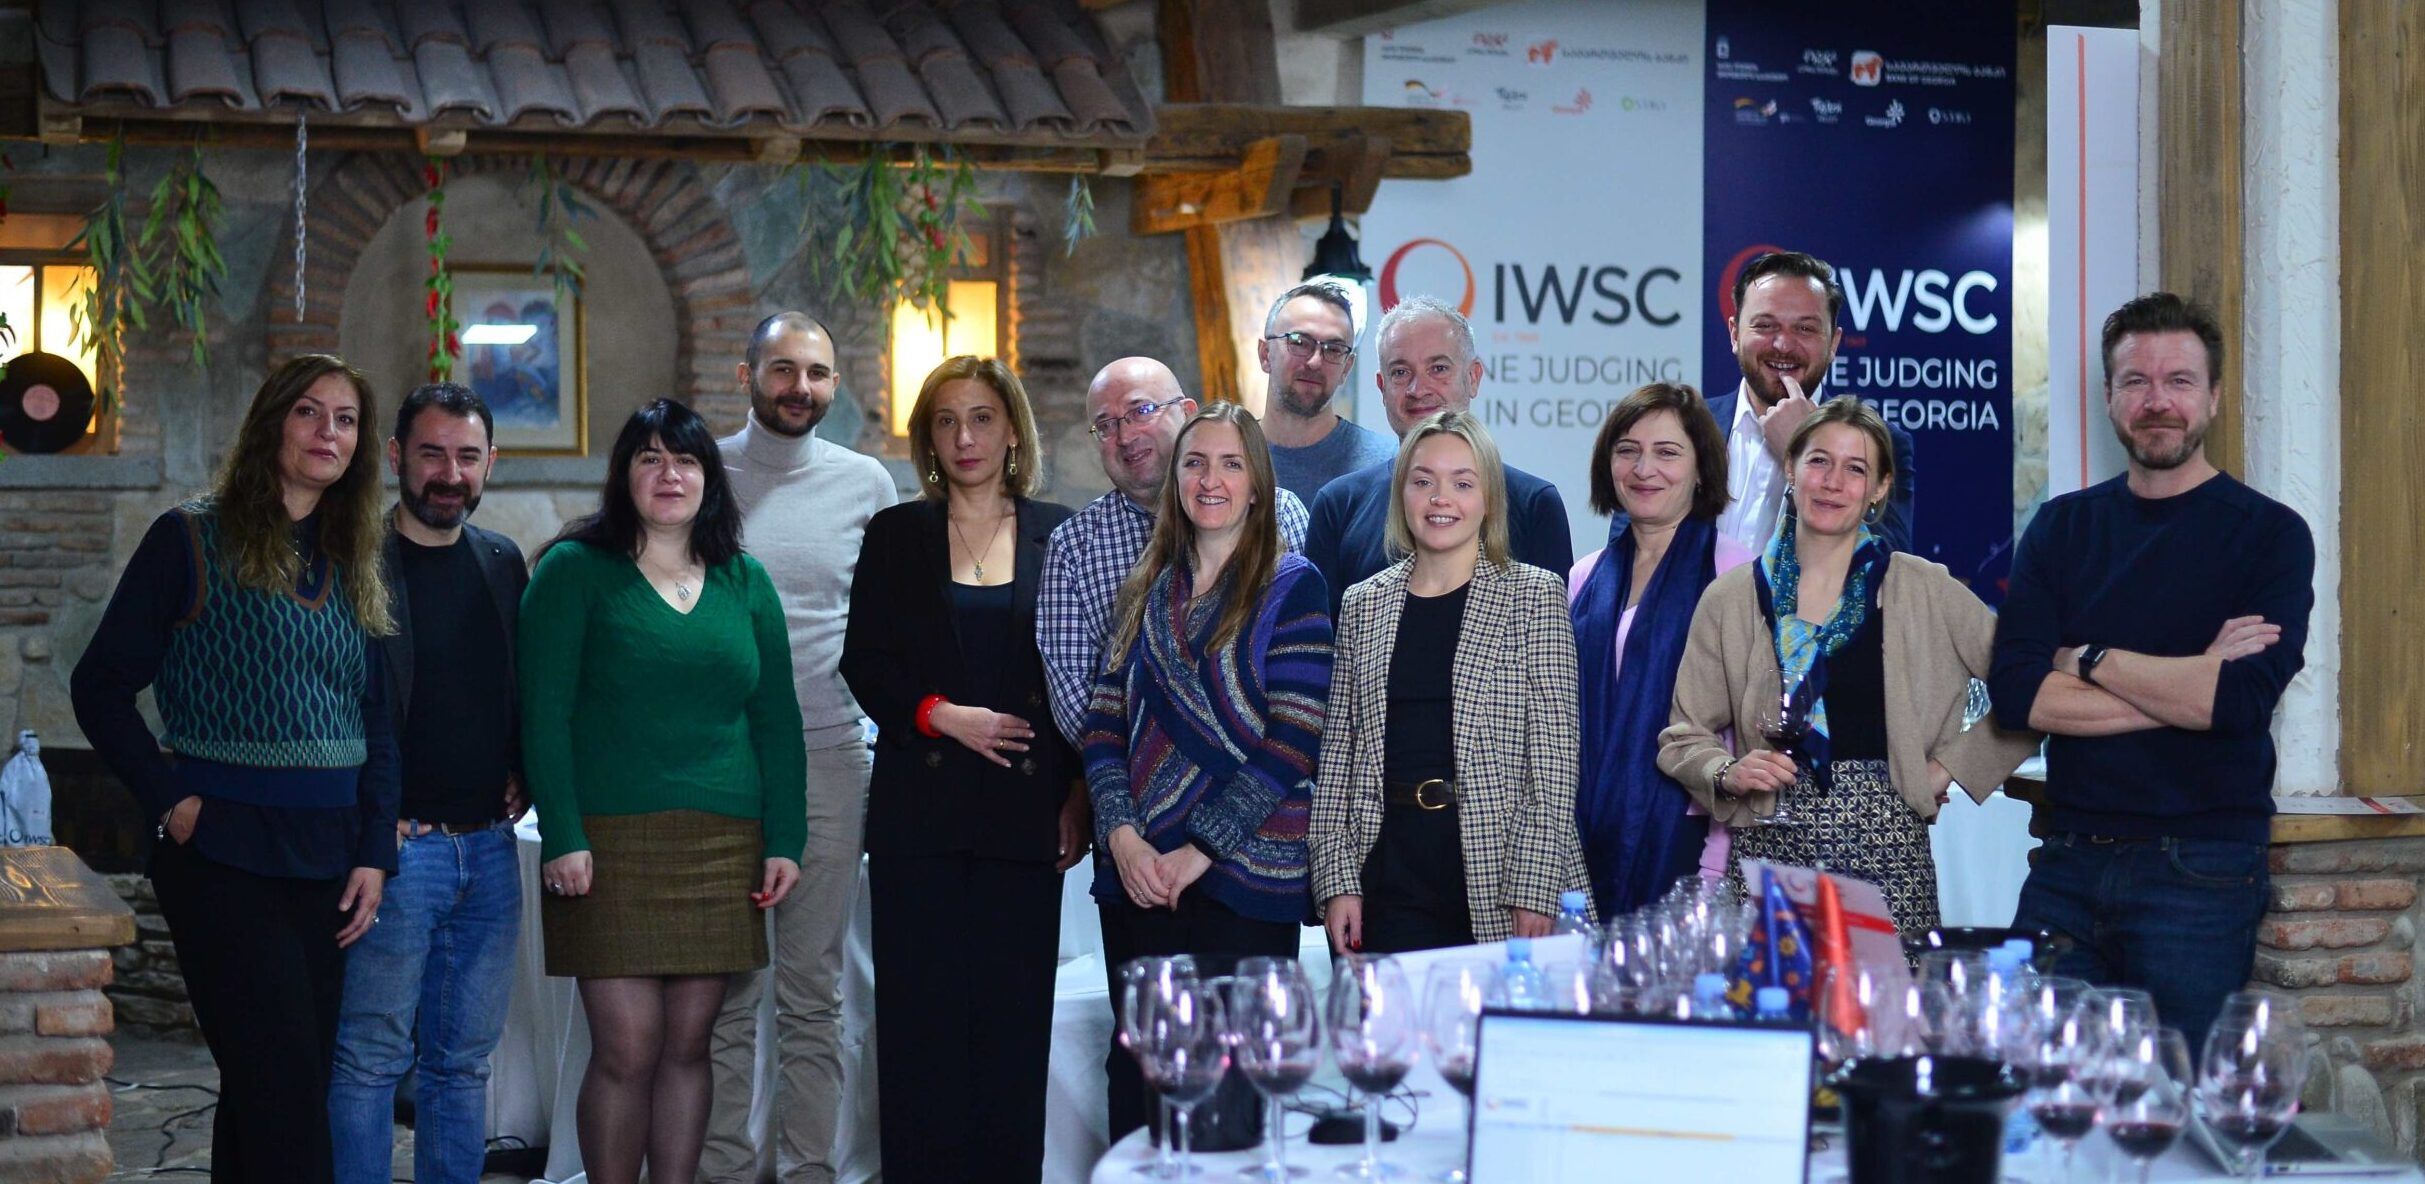 IWSC in Georgia: judges blown away by the quality of wines